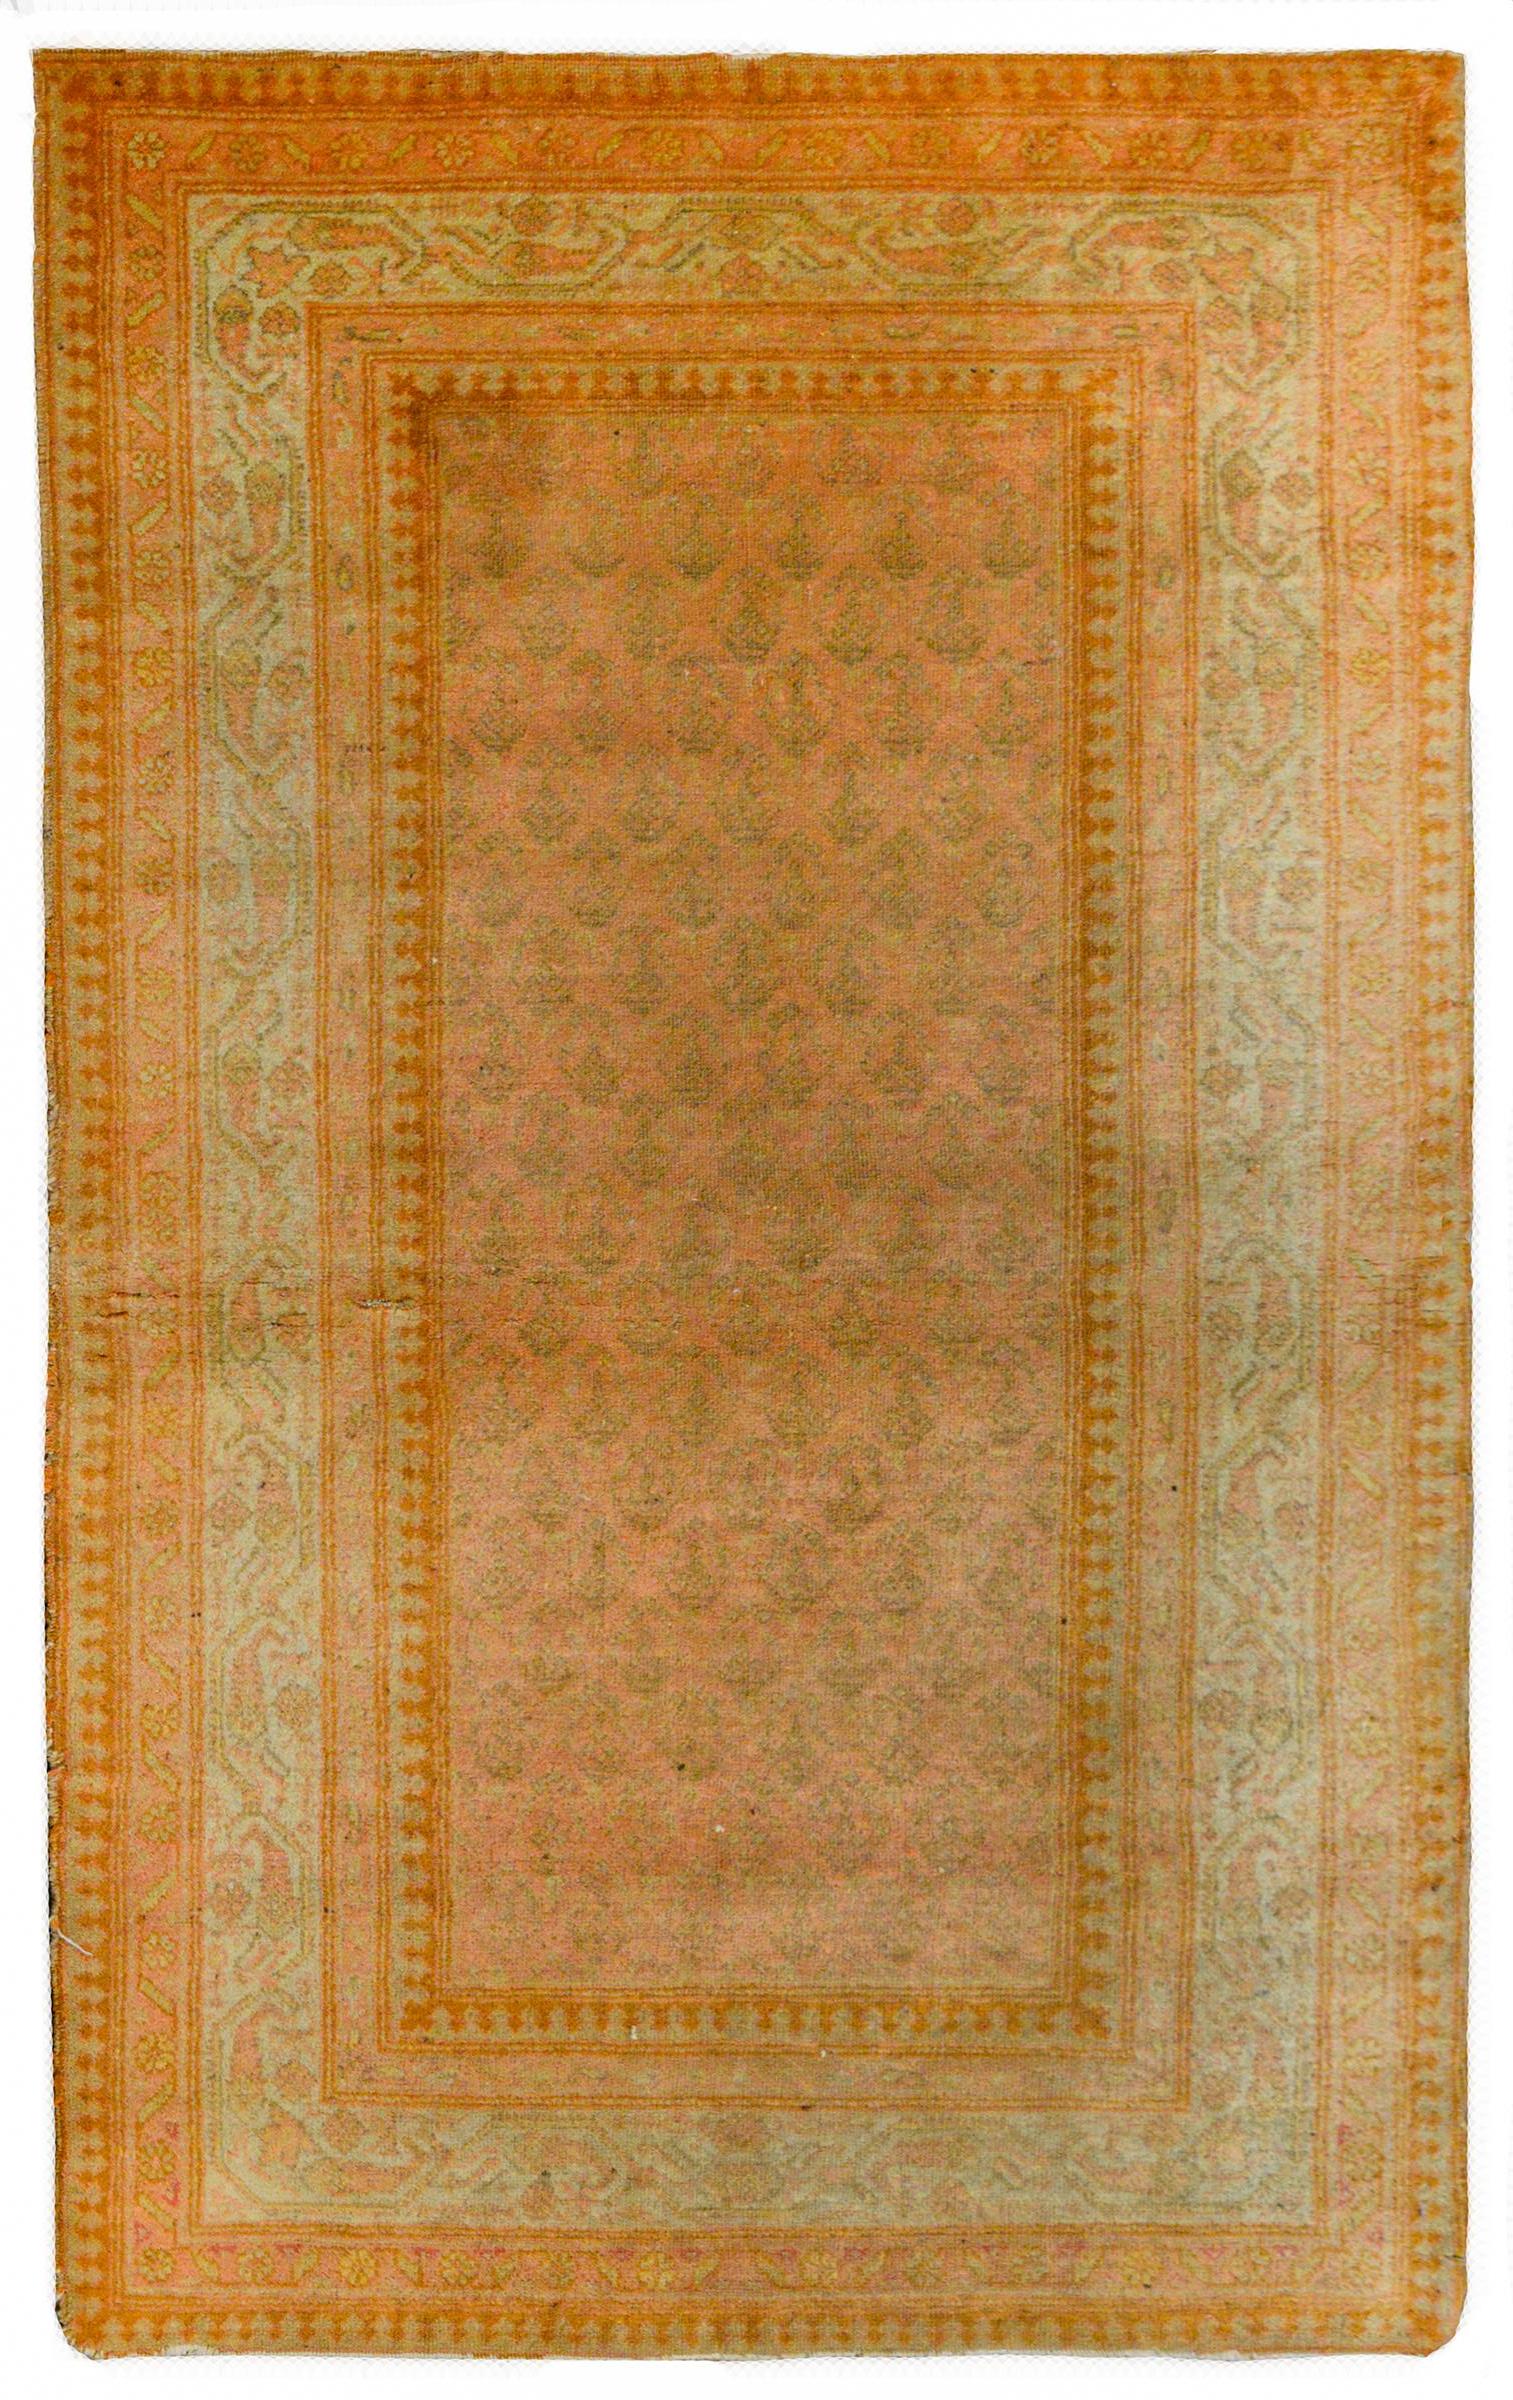 A wonderful early 20th century Persian Seraband rug with an all-over paisley pattern woven in a simple tone-on-tone pink and taupe color-way surrounded by a wide border containing multiple stylized floral patterned stripes woven in similar colors as